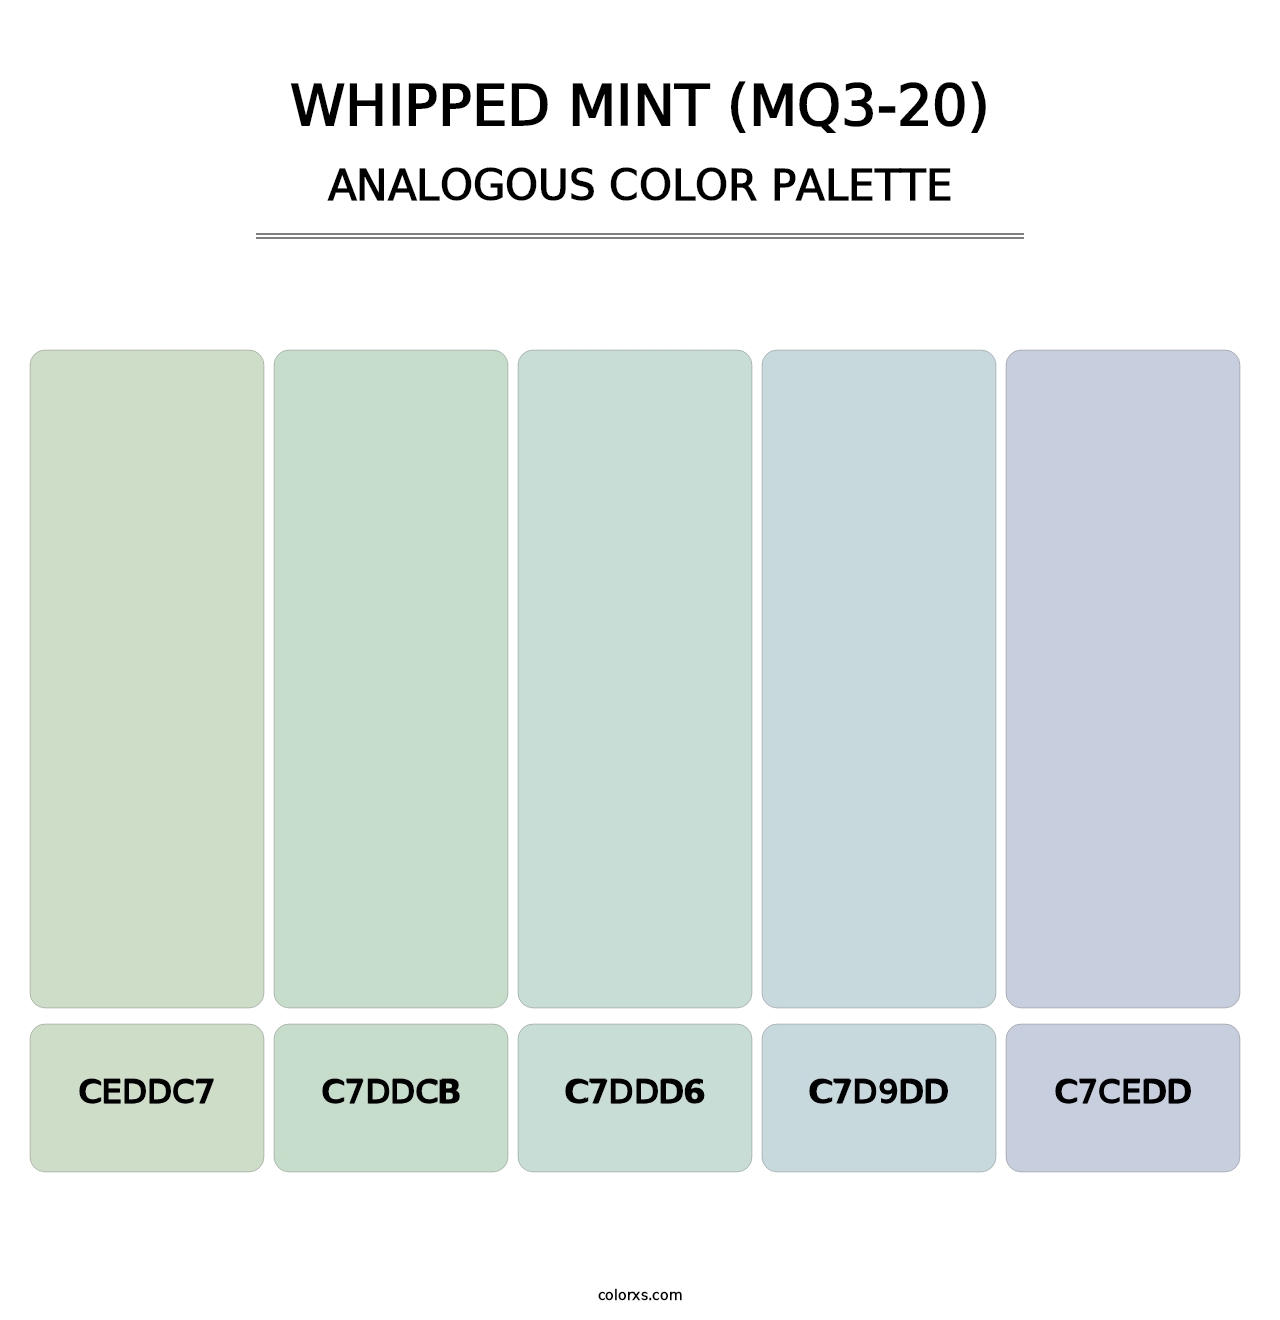 Whipped Mint (MQ3-20) - Analogous Color Palette